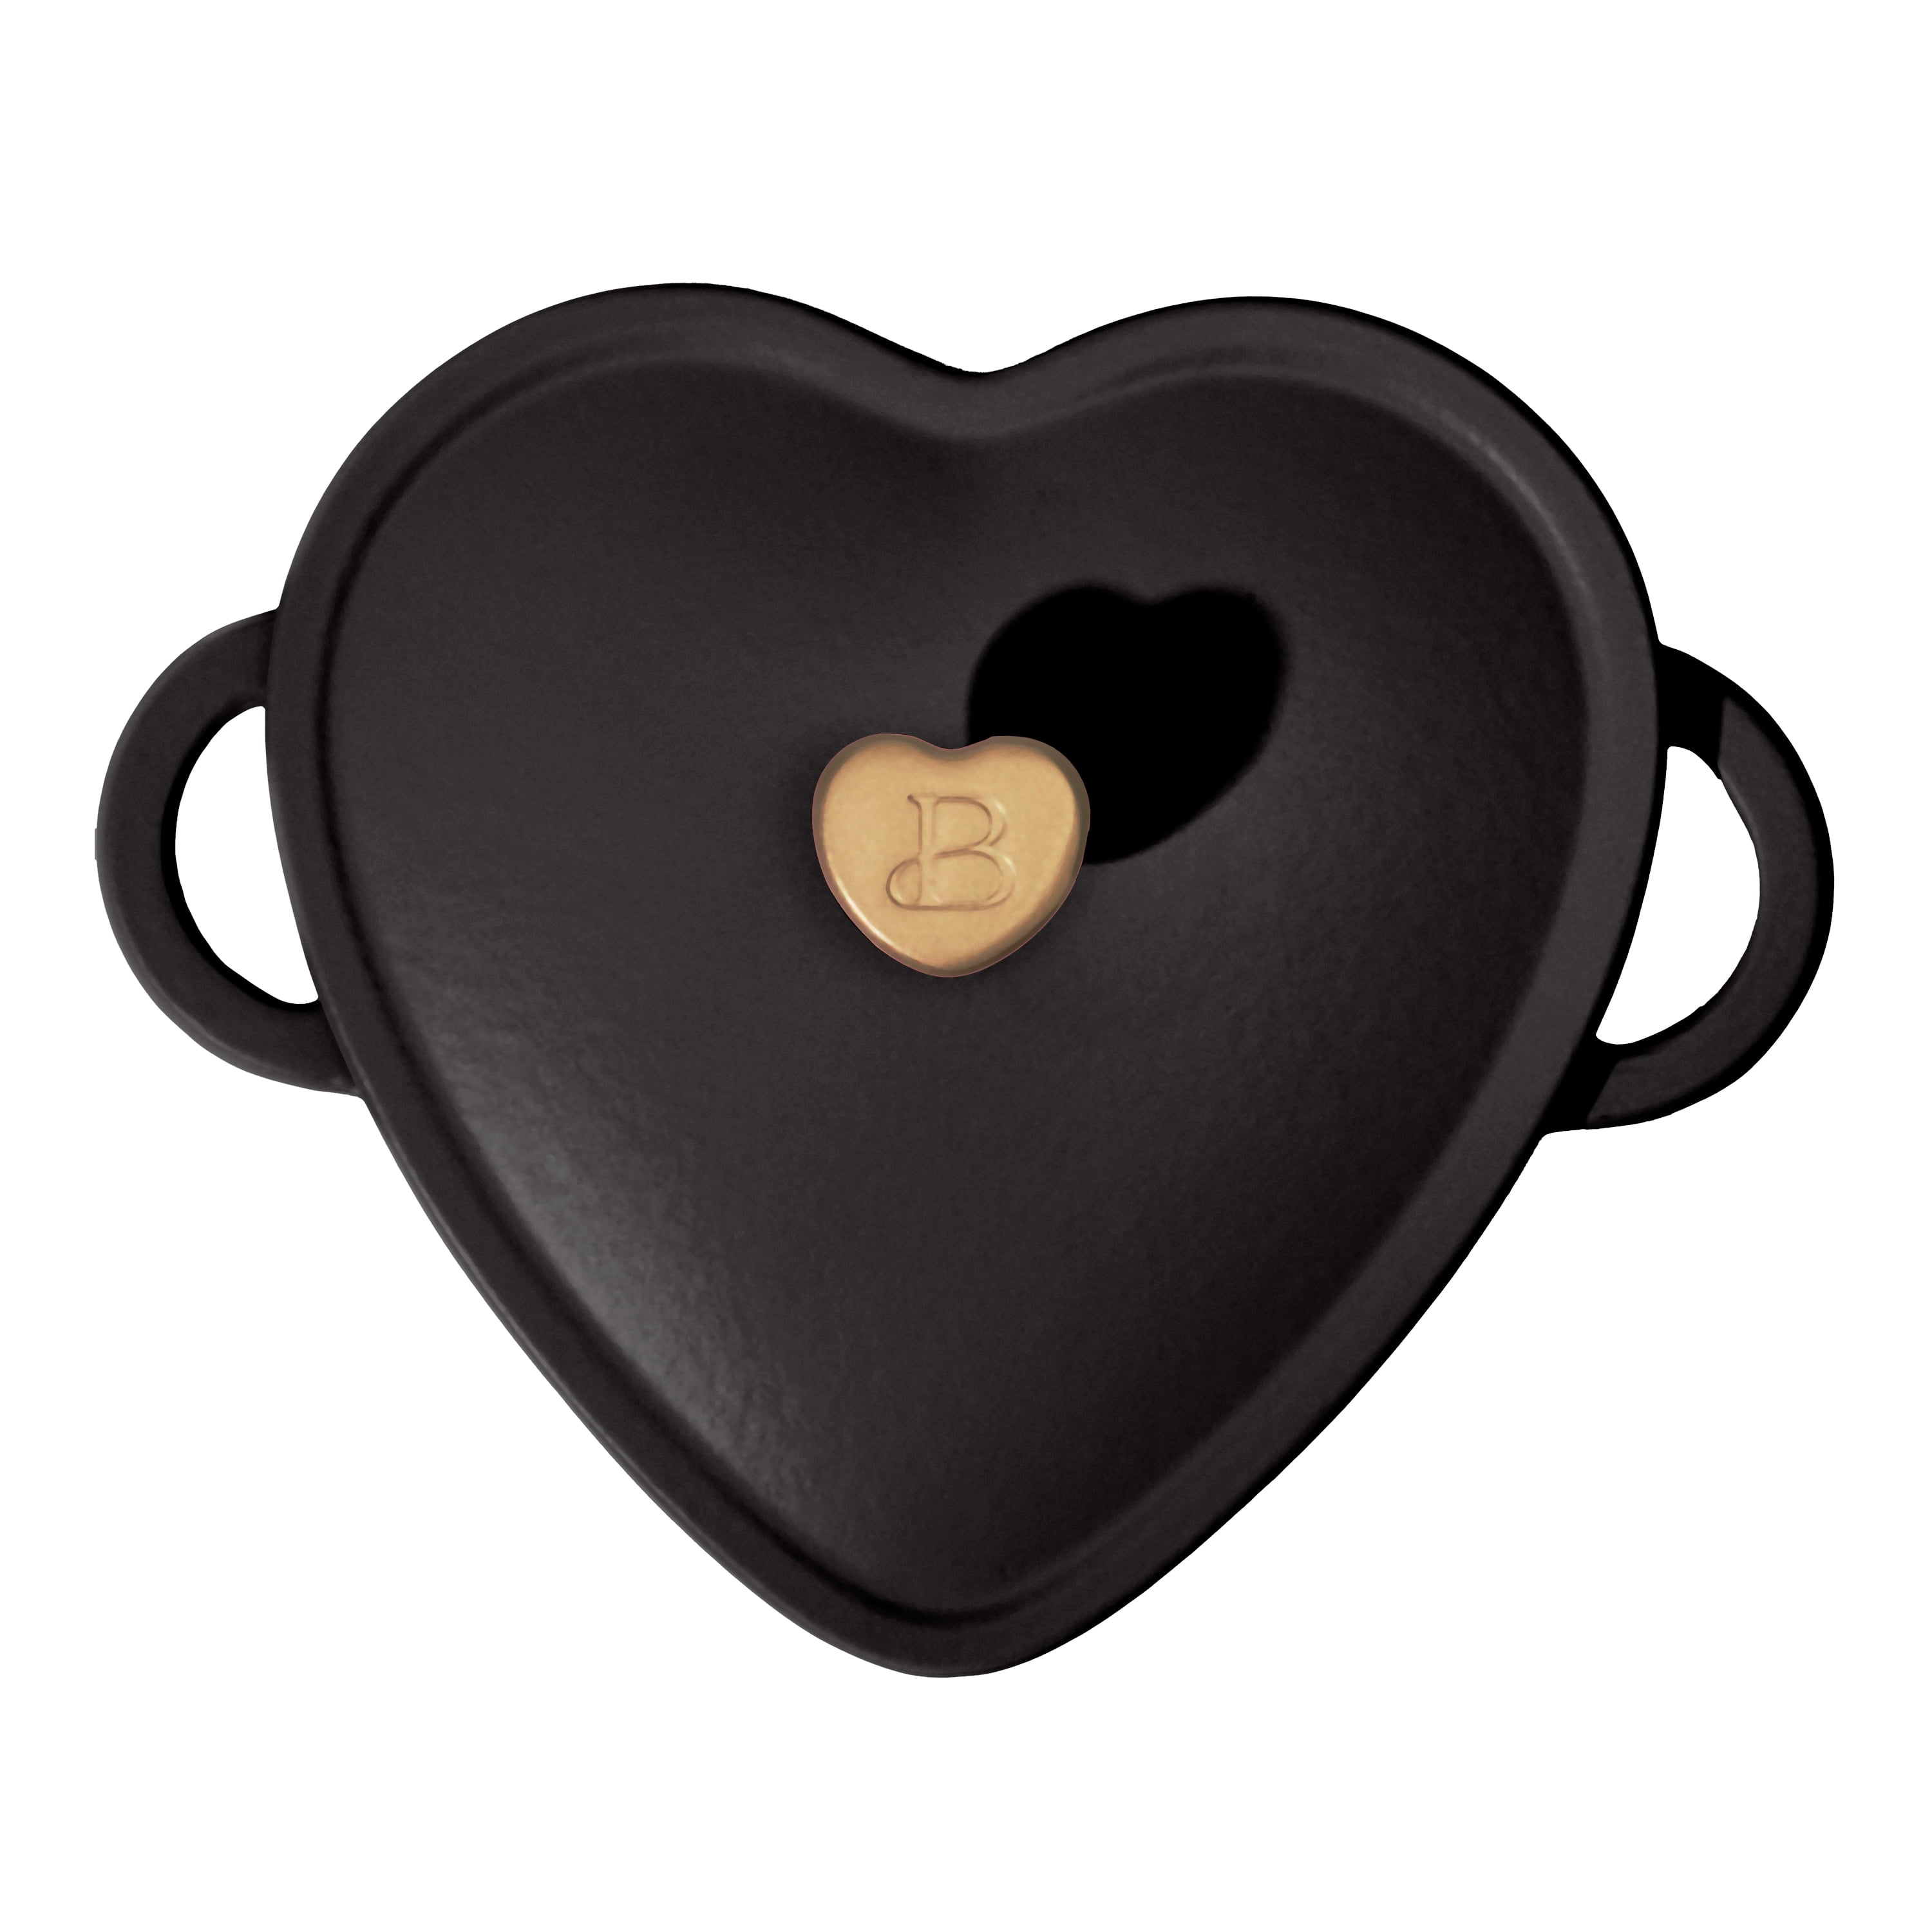 Heart Shaped Dutch Oven - Household Items - Los Angeles